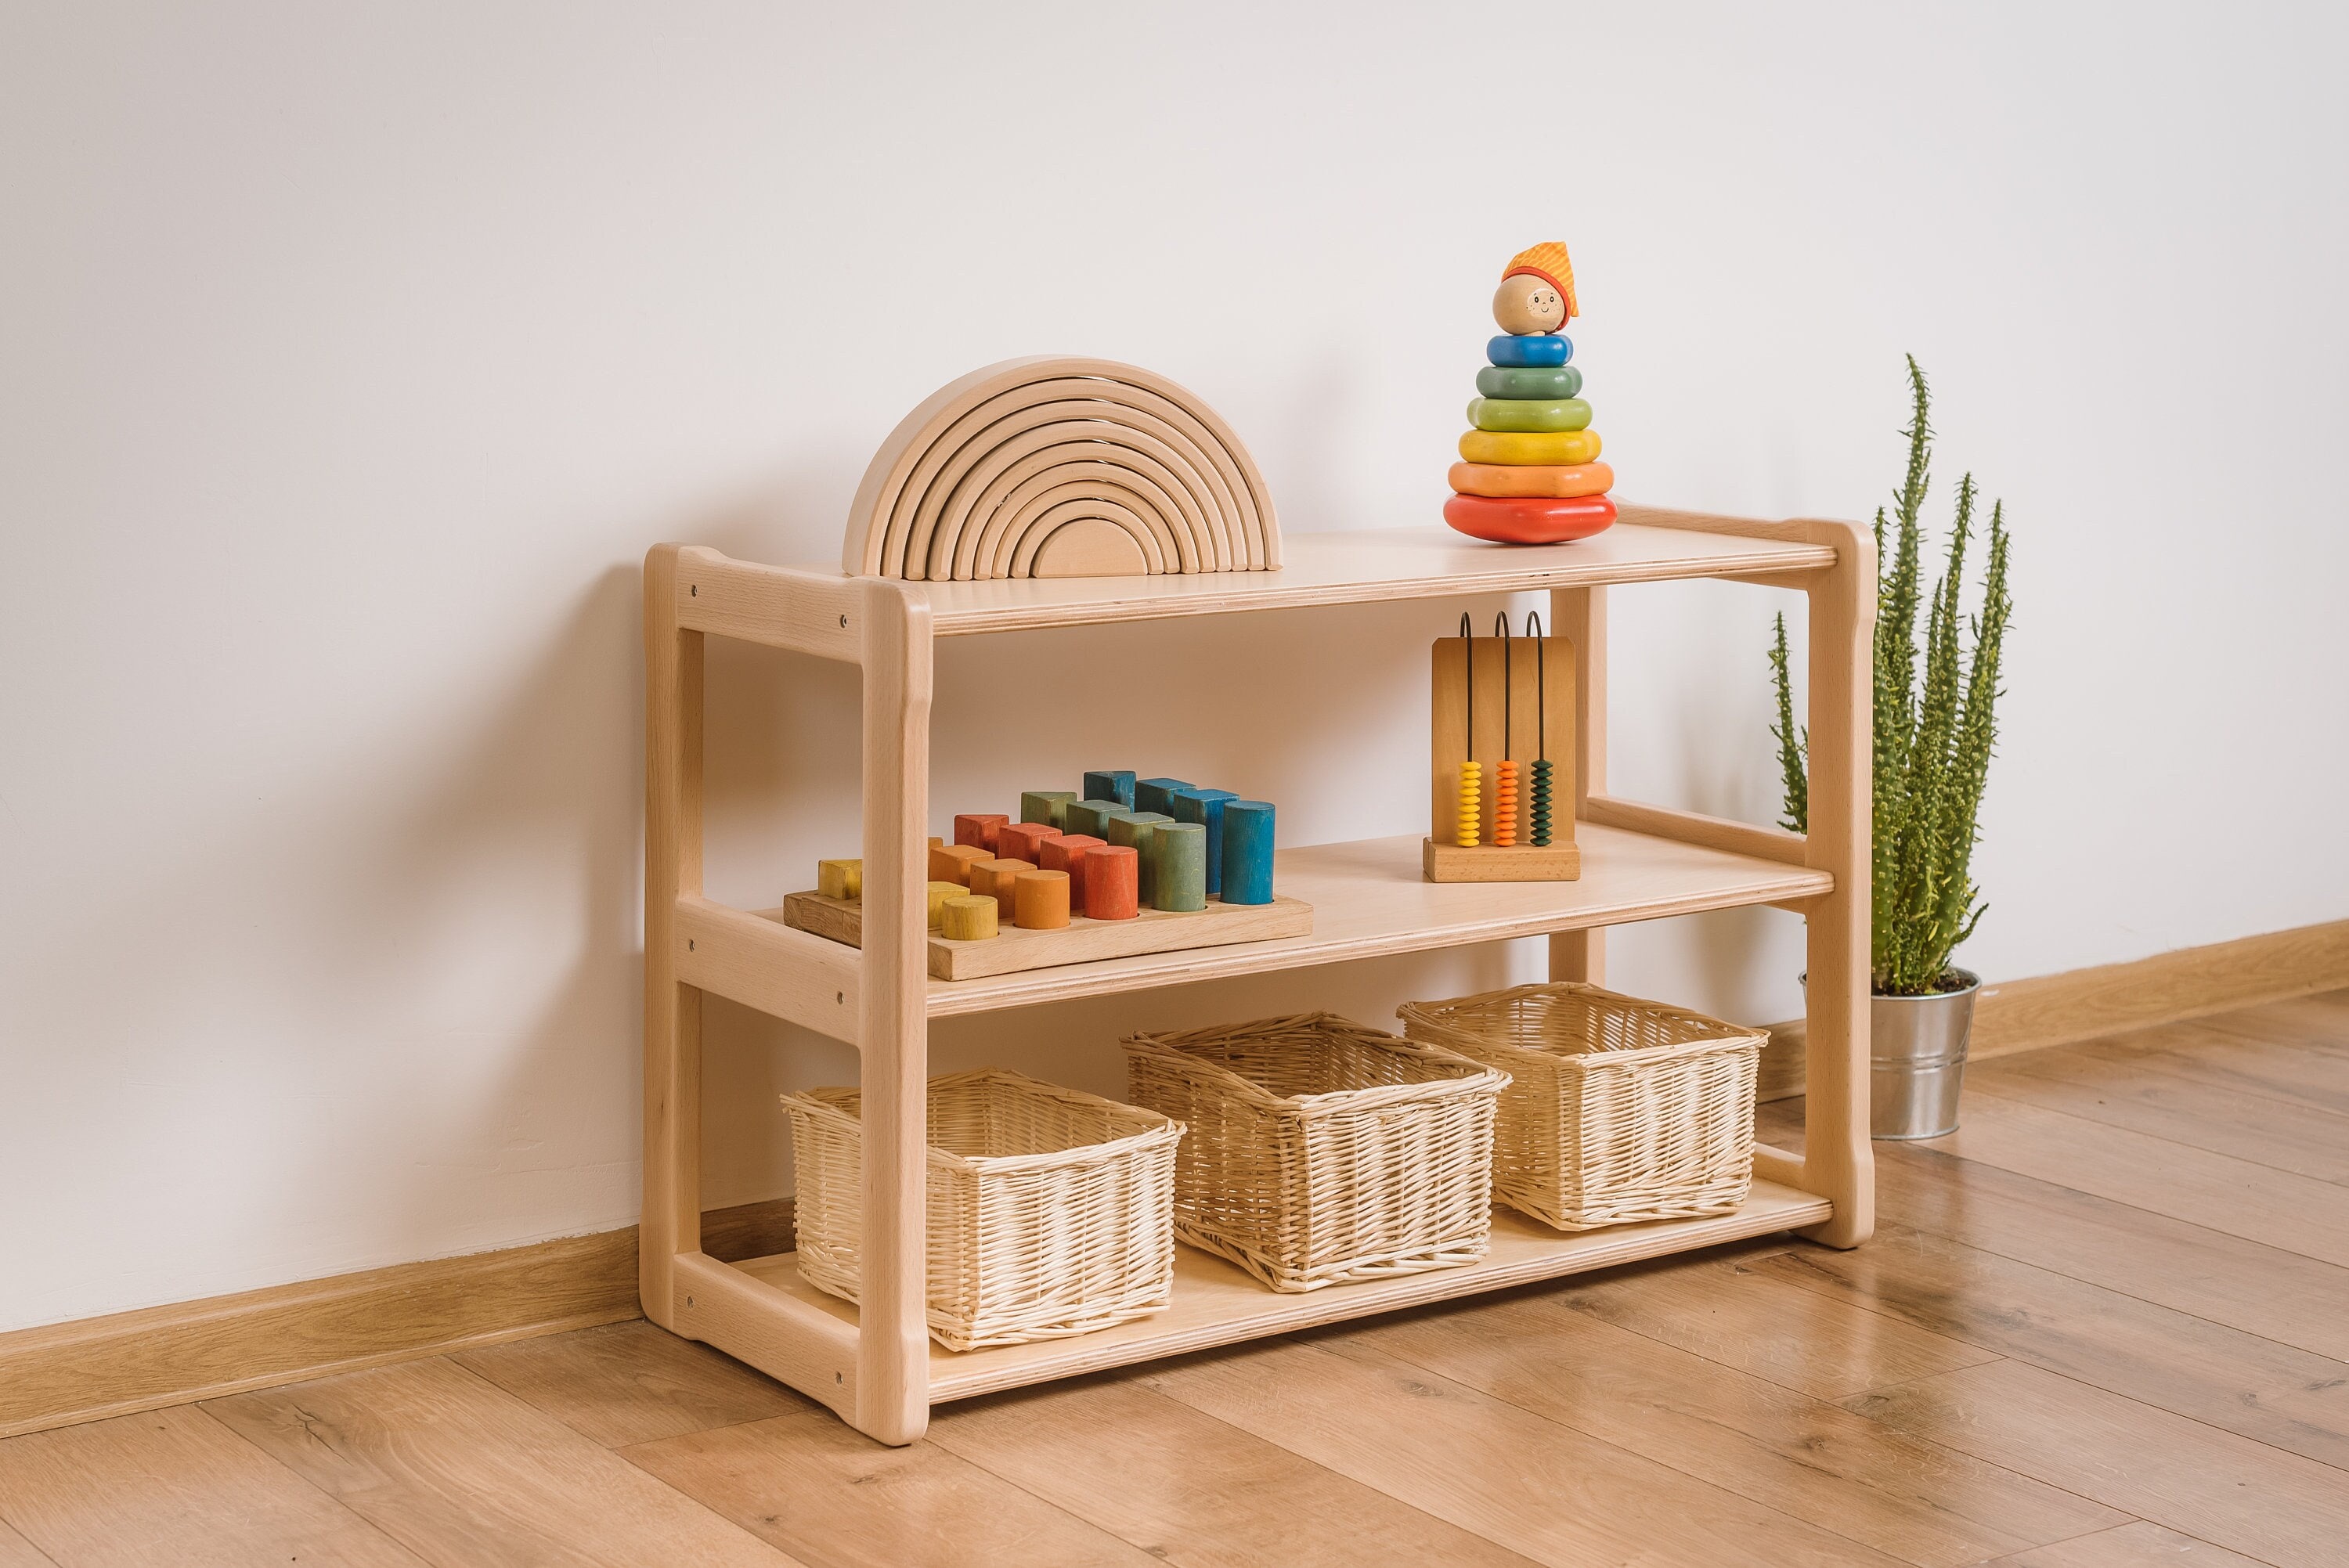 2021 Best selling crazy store wooden montessori toys for children